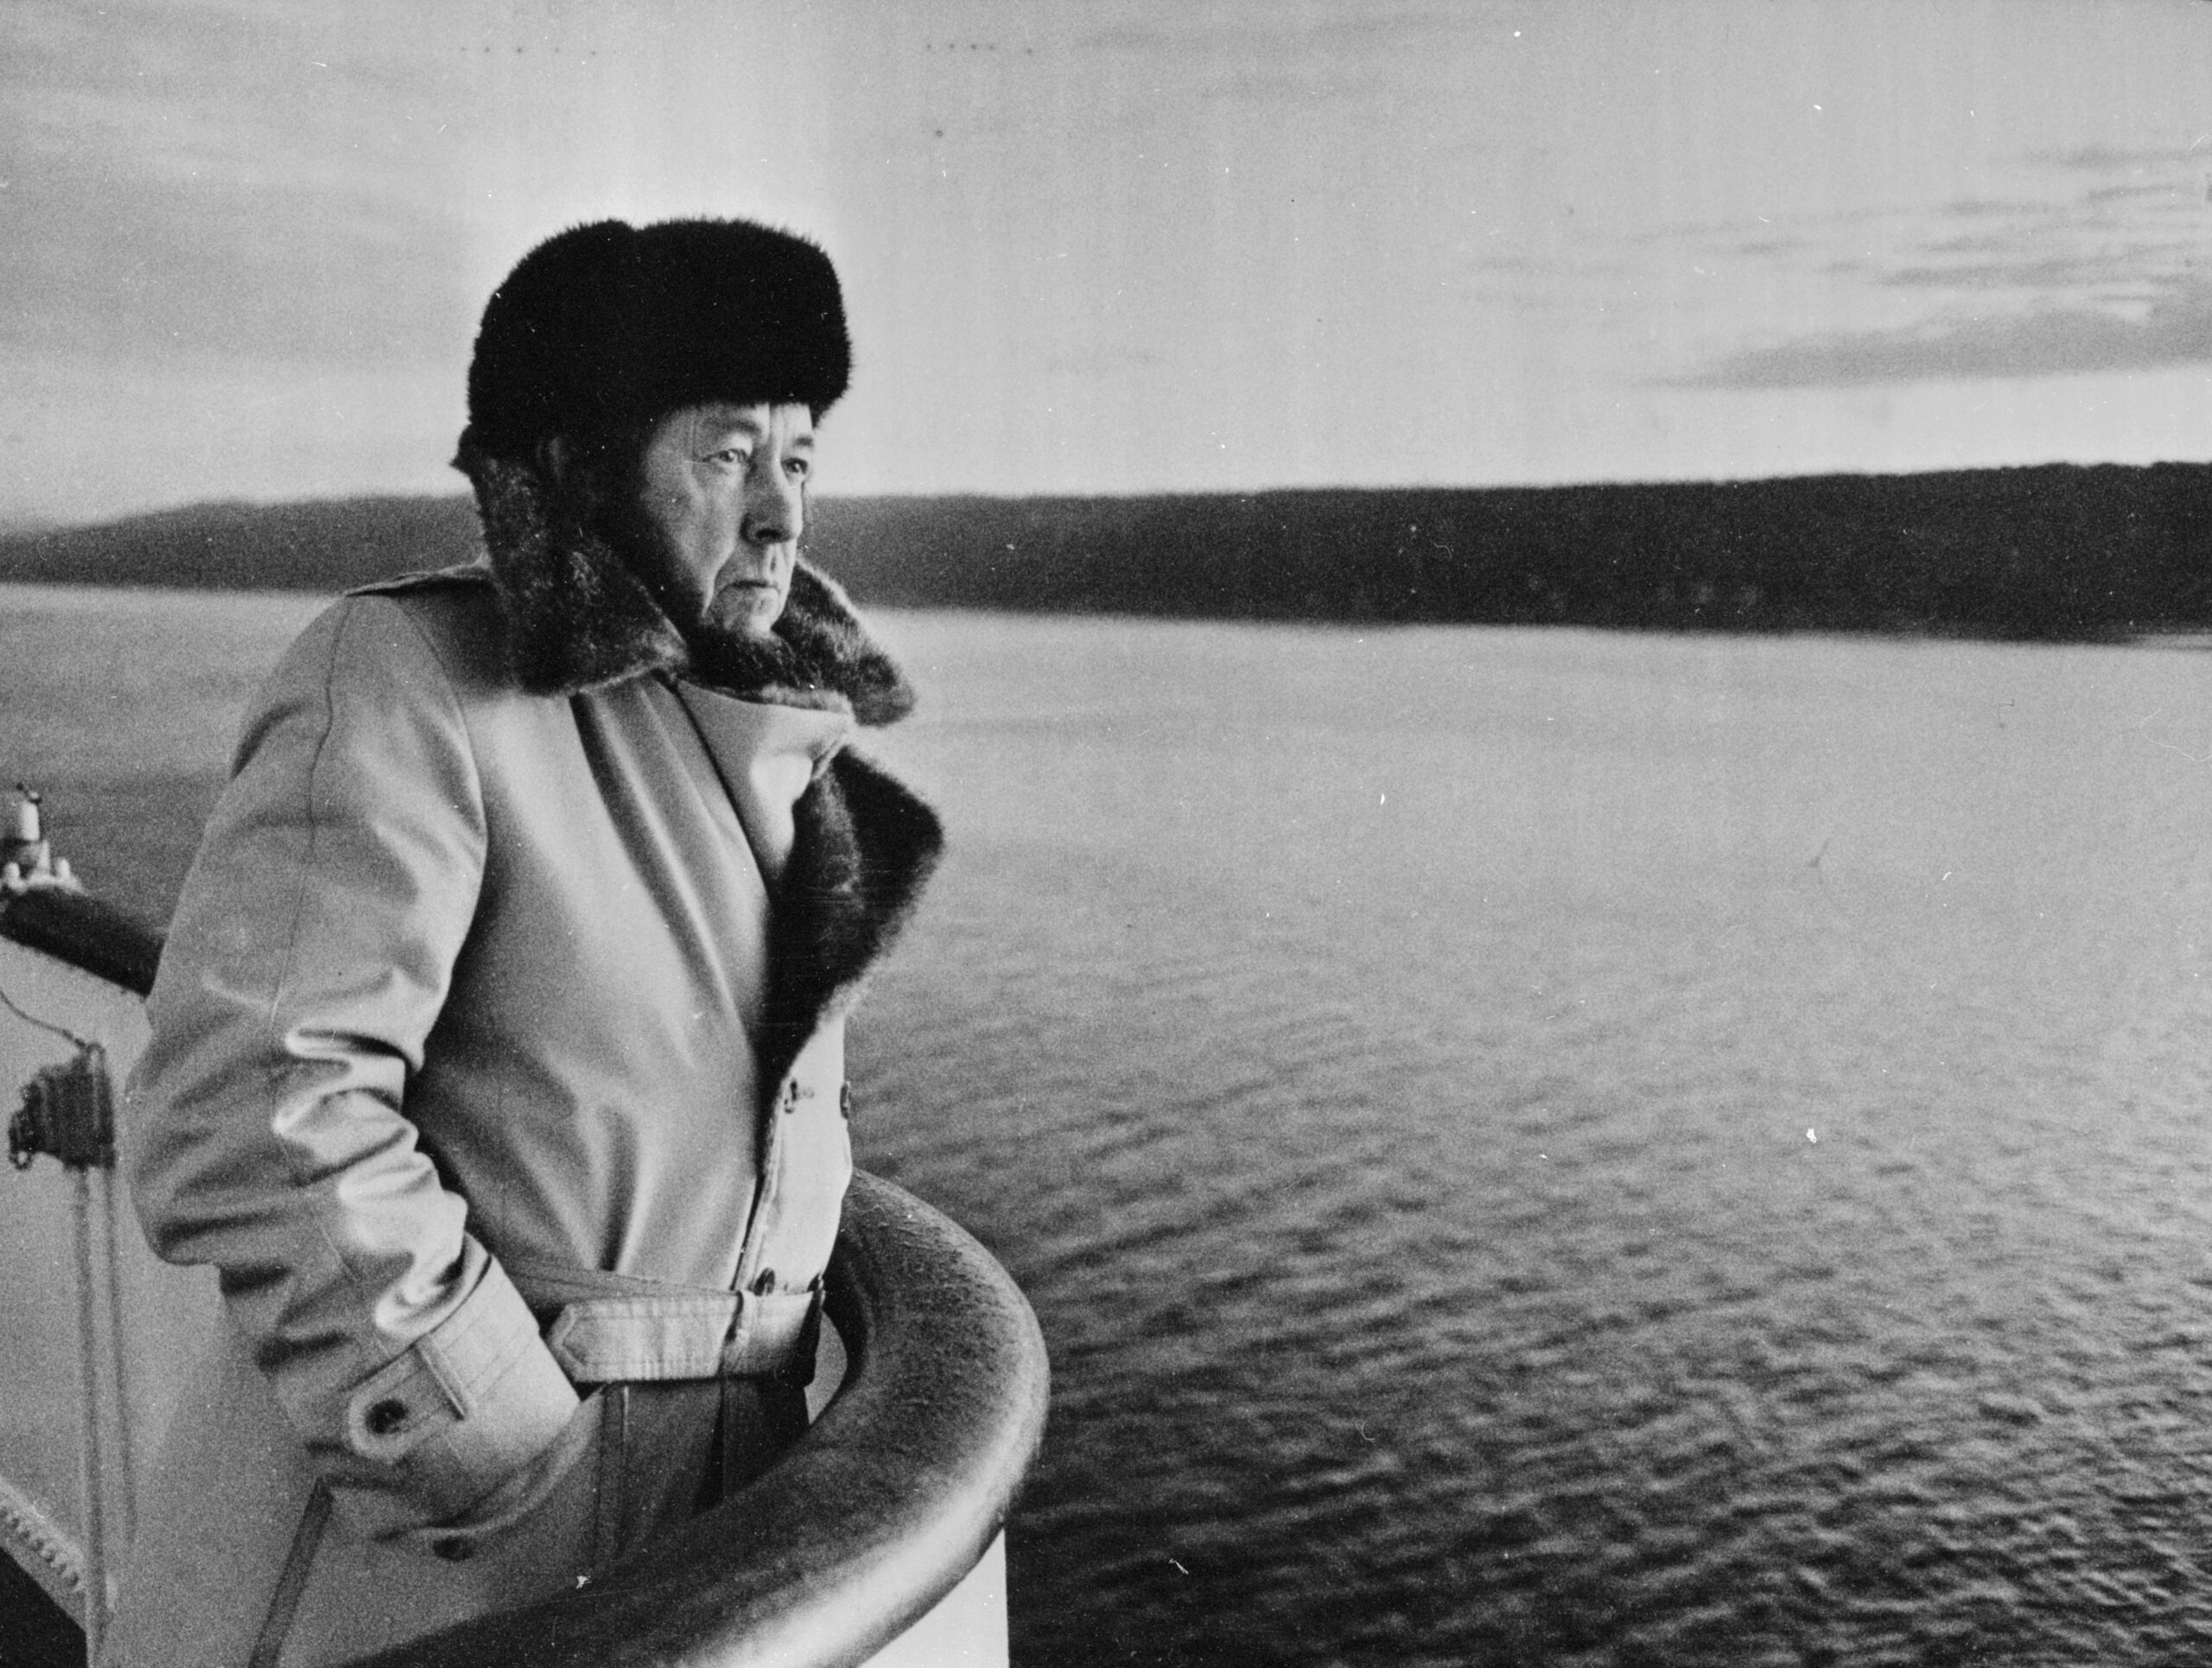 Exiled Russian writer and Nobel prize winner Alexander Solzhenitsyn admiring the Norwegian coastline after a visit to Denmark (Keystone/Hulton Archive via Getty Images)